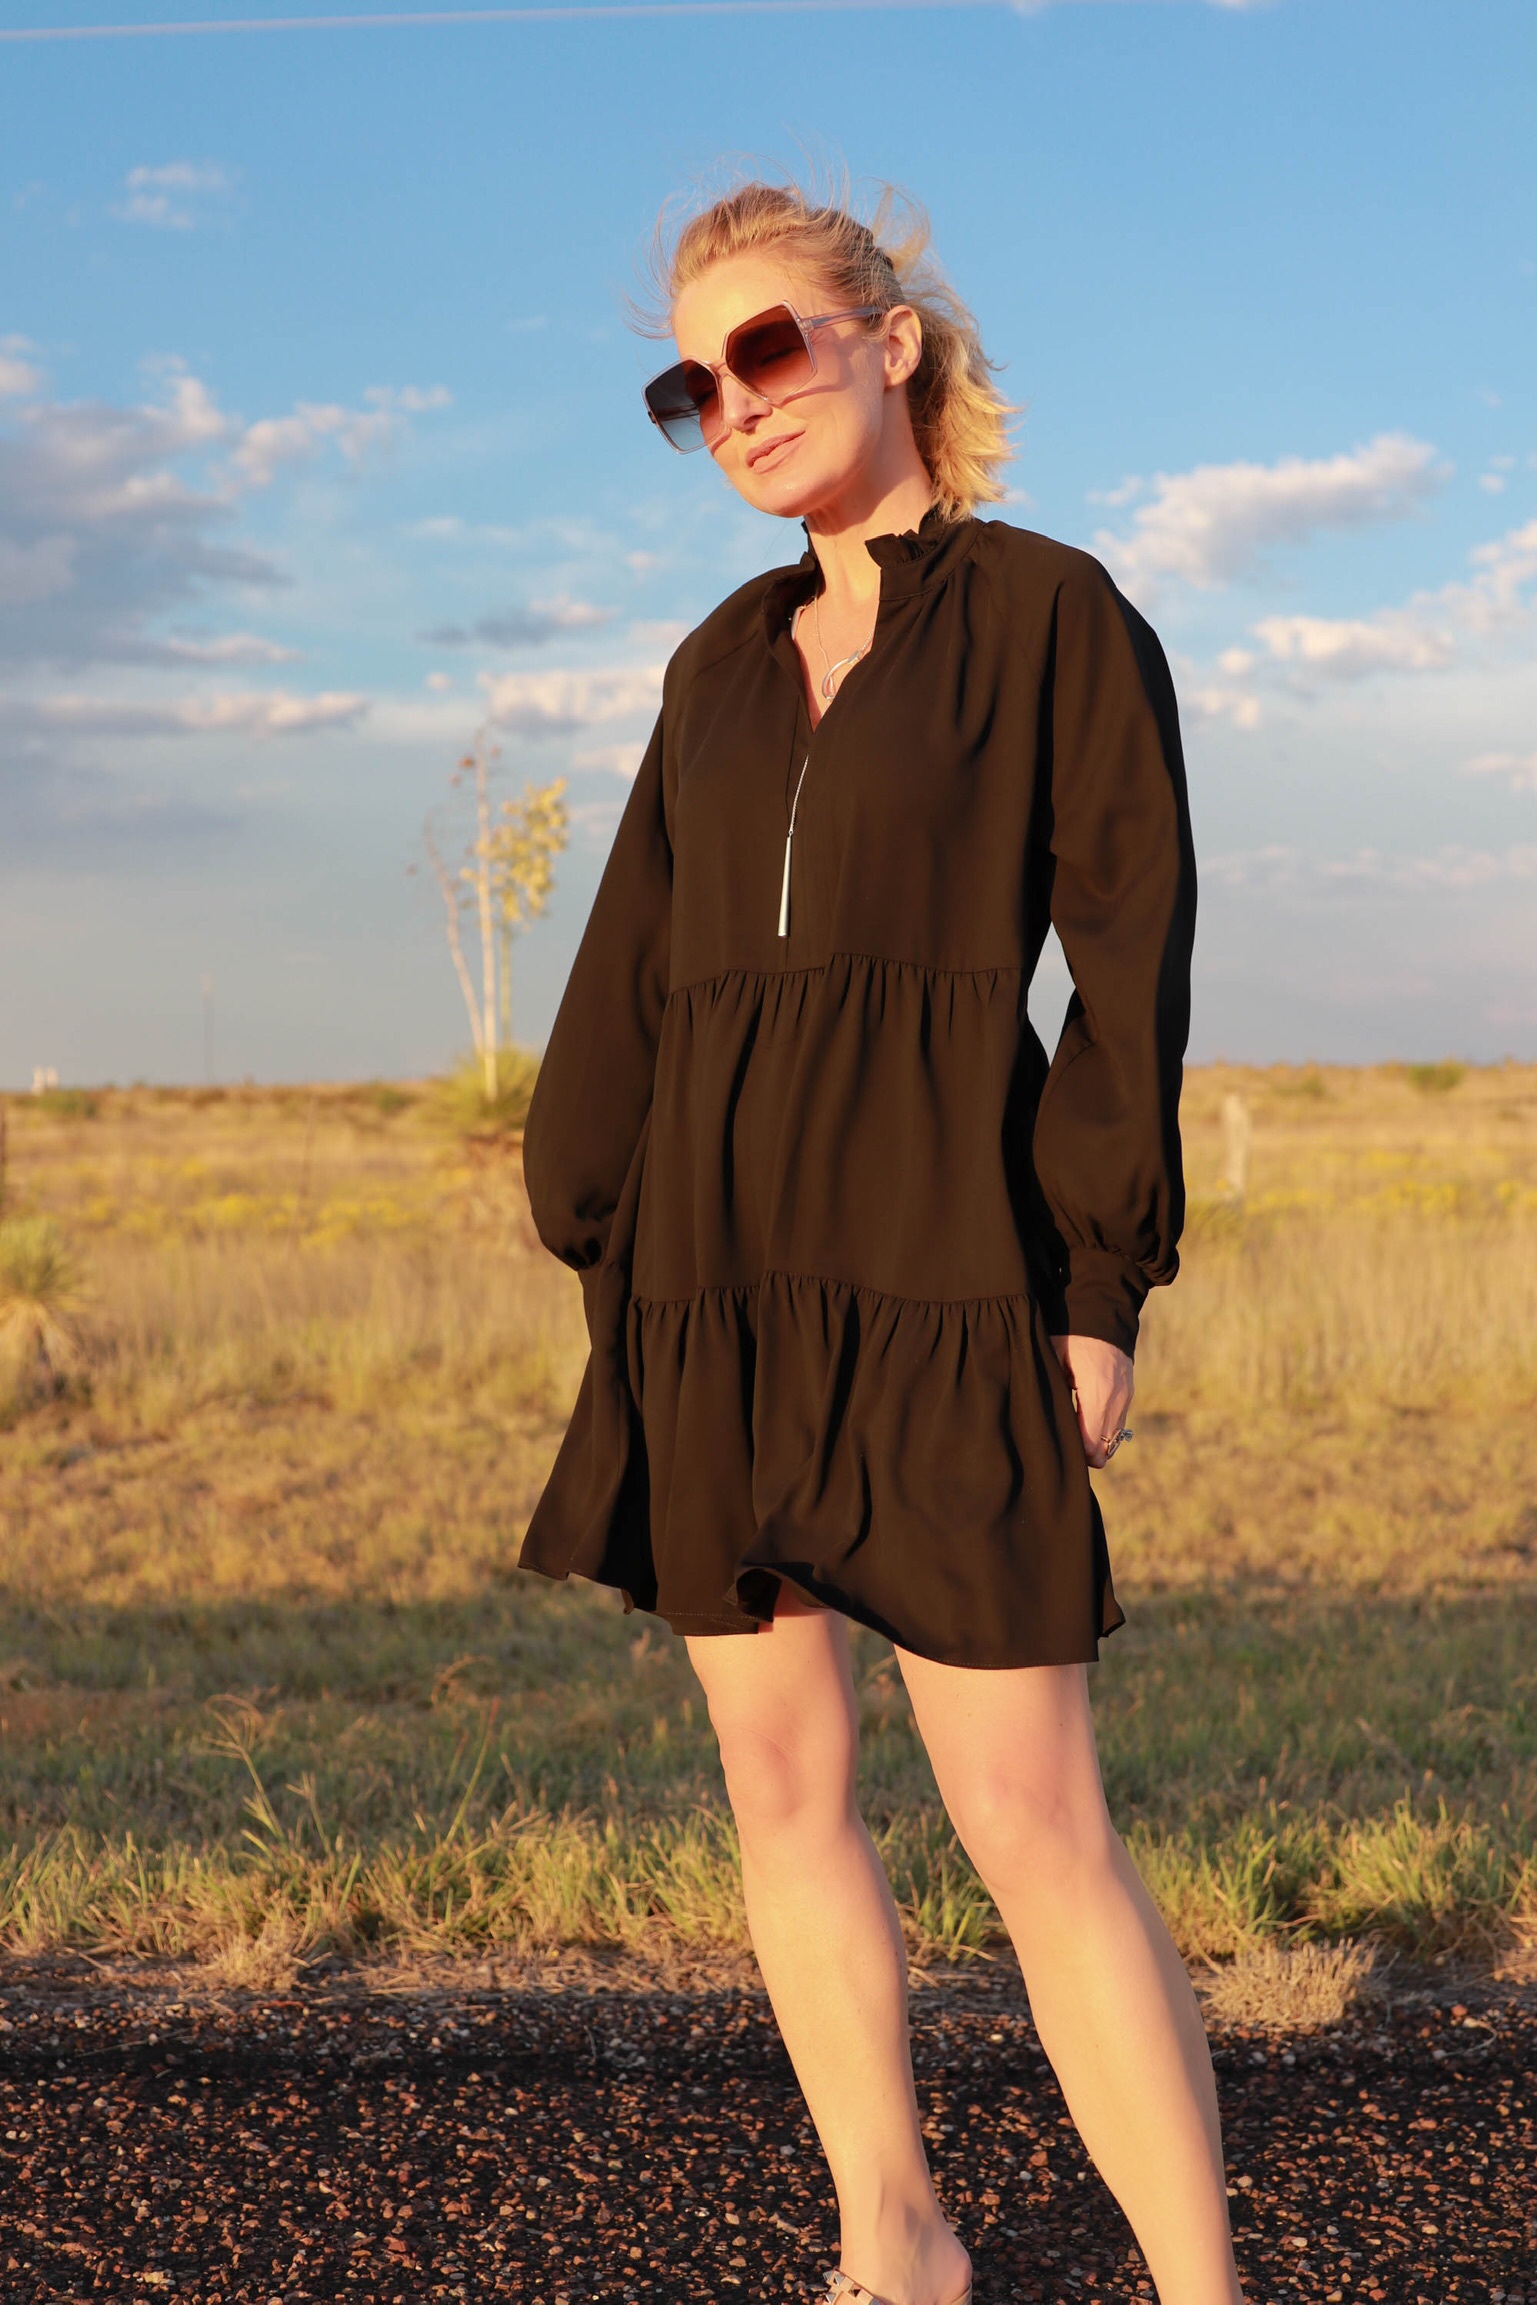 Dress For Summer, Fashion blogger Erin Busbee of Busbee Style wearing a black long sleeve tiered Amanda Uprichard dress with a Kendra Scott adjustable necklace, Saint Laurent sunglasses, and Valentino sandals in south Texas, Best dresses for summer, cute summer dresses, comfy summer dresses, cotton summer dresses, comfortable summer dresses, airy summer dresses, summer dresses with pockets, lightweight summer dresses, best dresses for travel, summer dresses for beach vacation